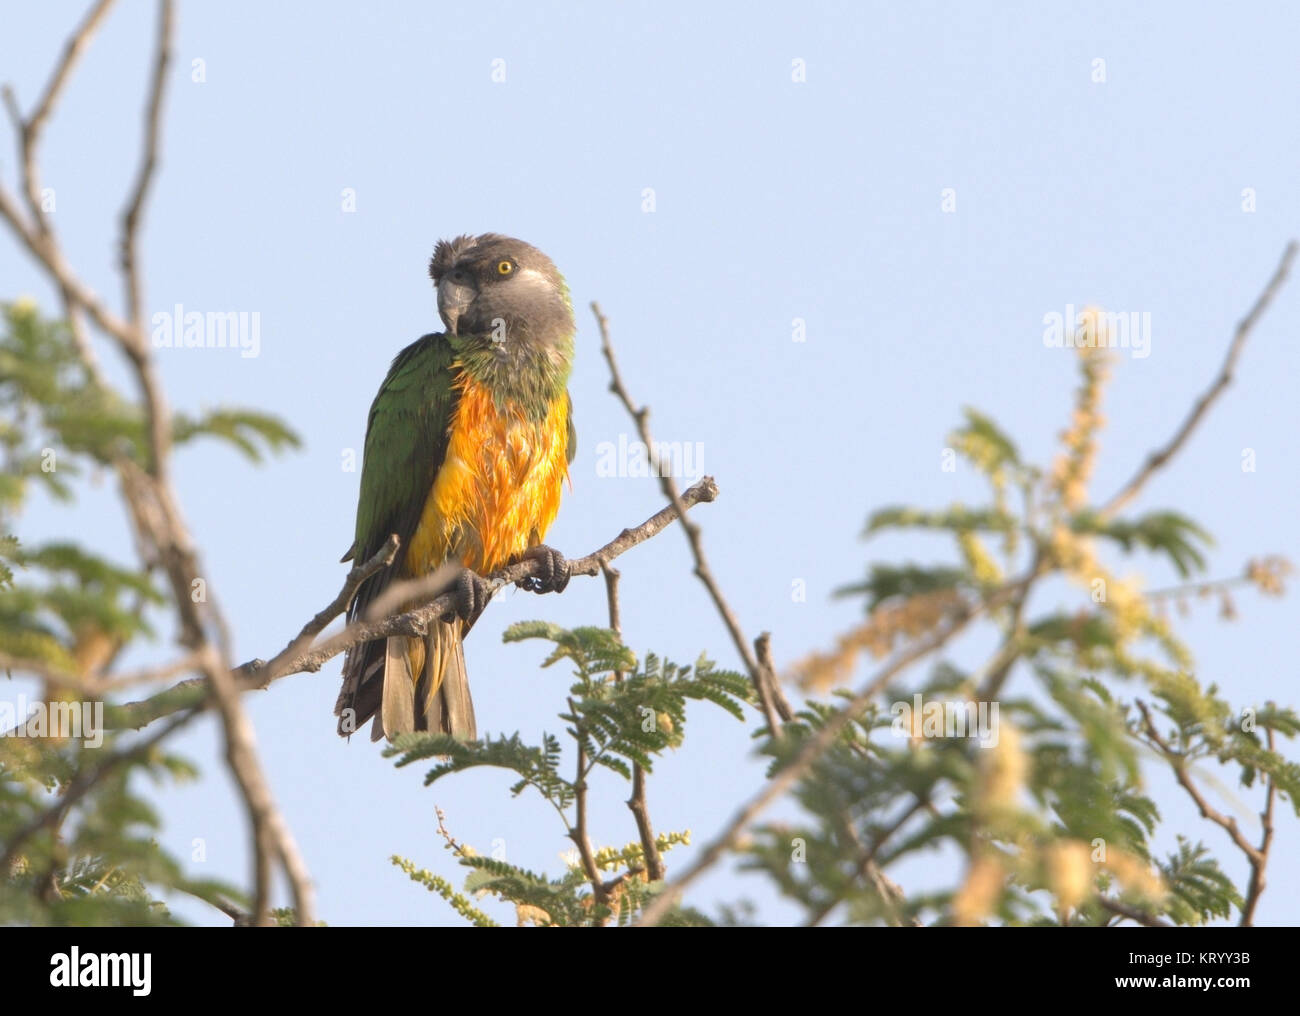 Senegal parrot Poicephalus senegalus adult perched in tree canopy, Gambia Stock Photo